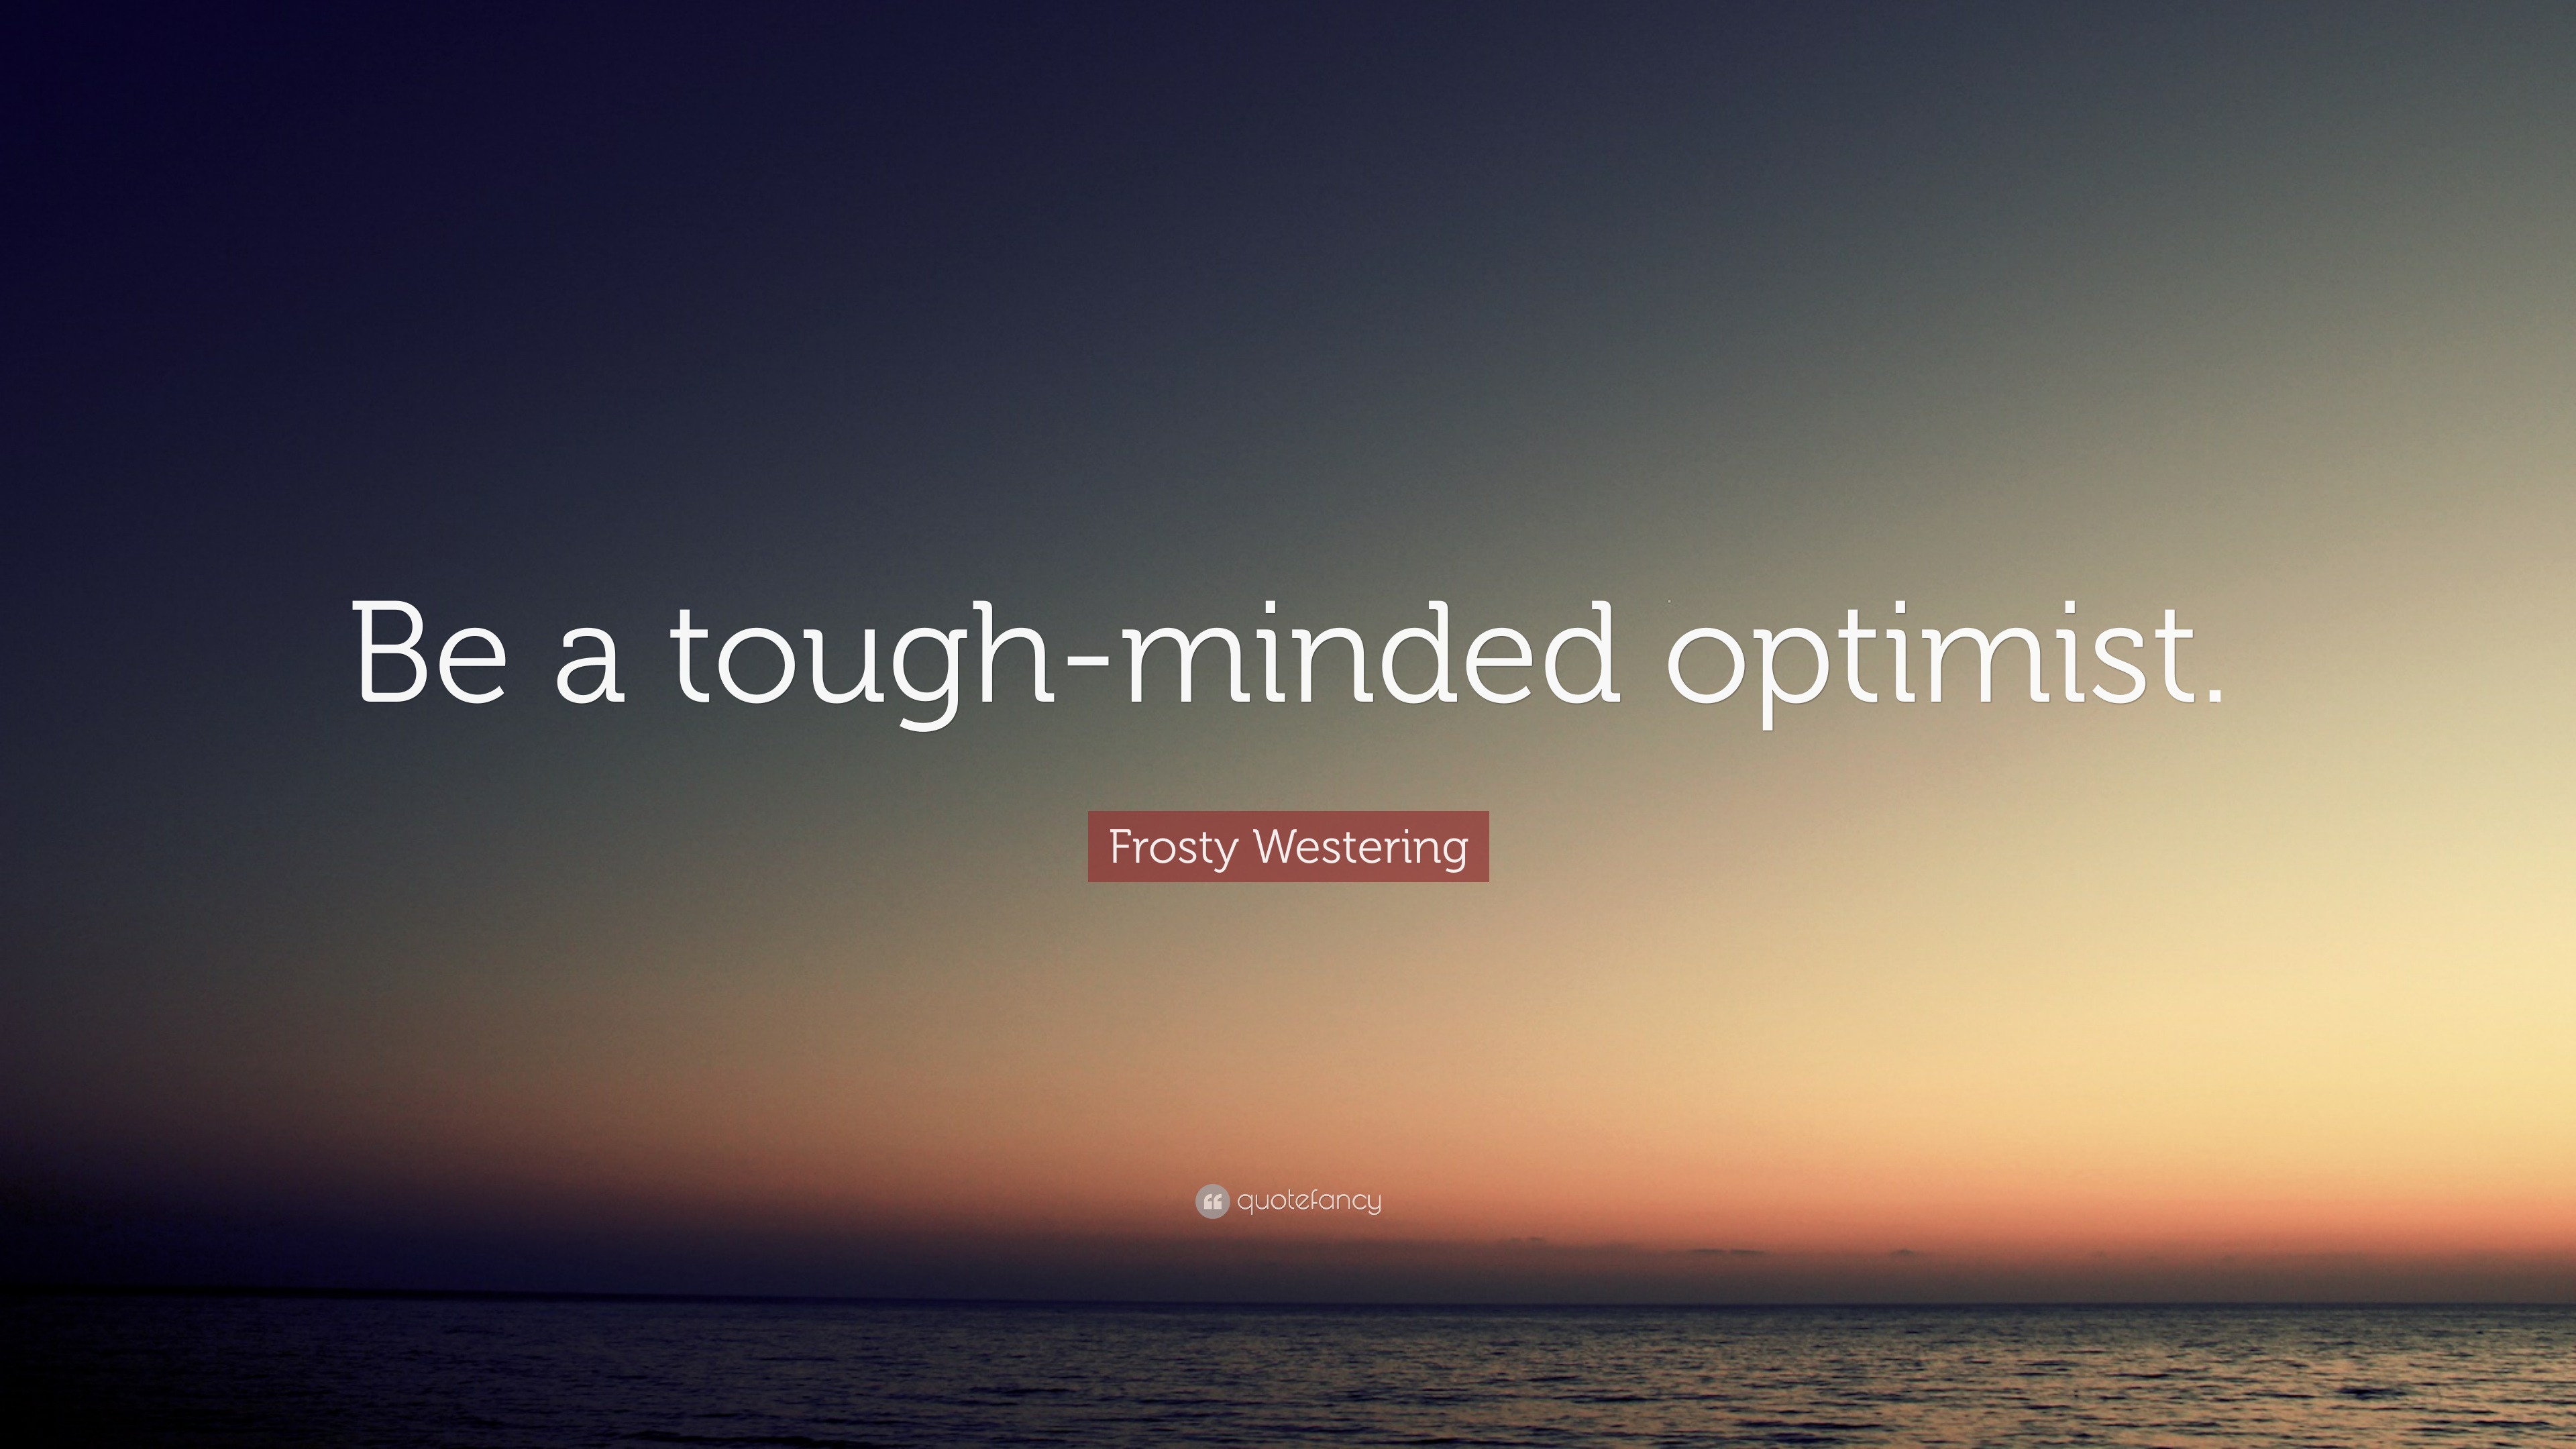 Frosty Westering Quote: “Be a tough-minded optimist.”